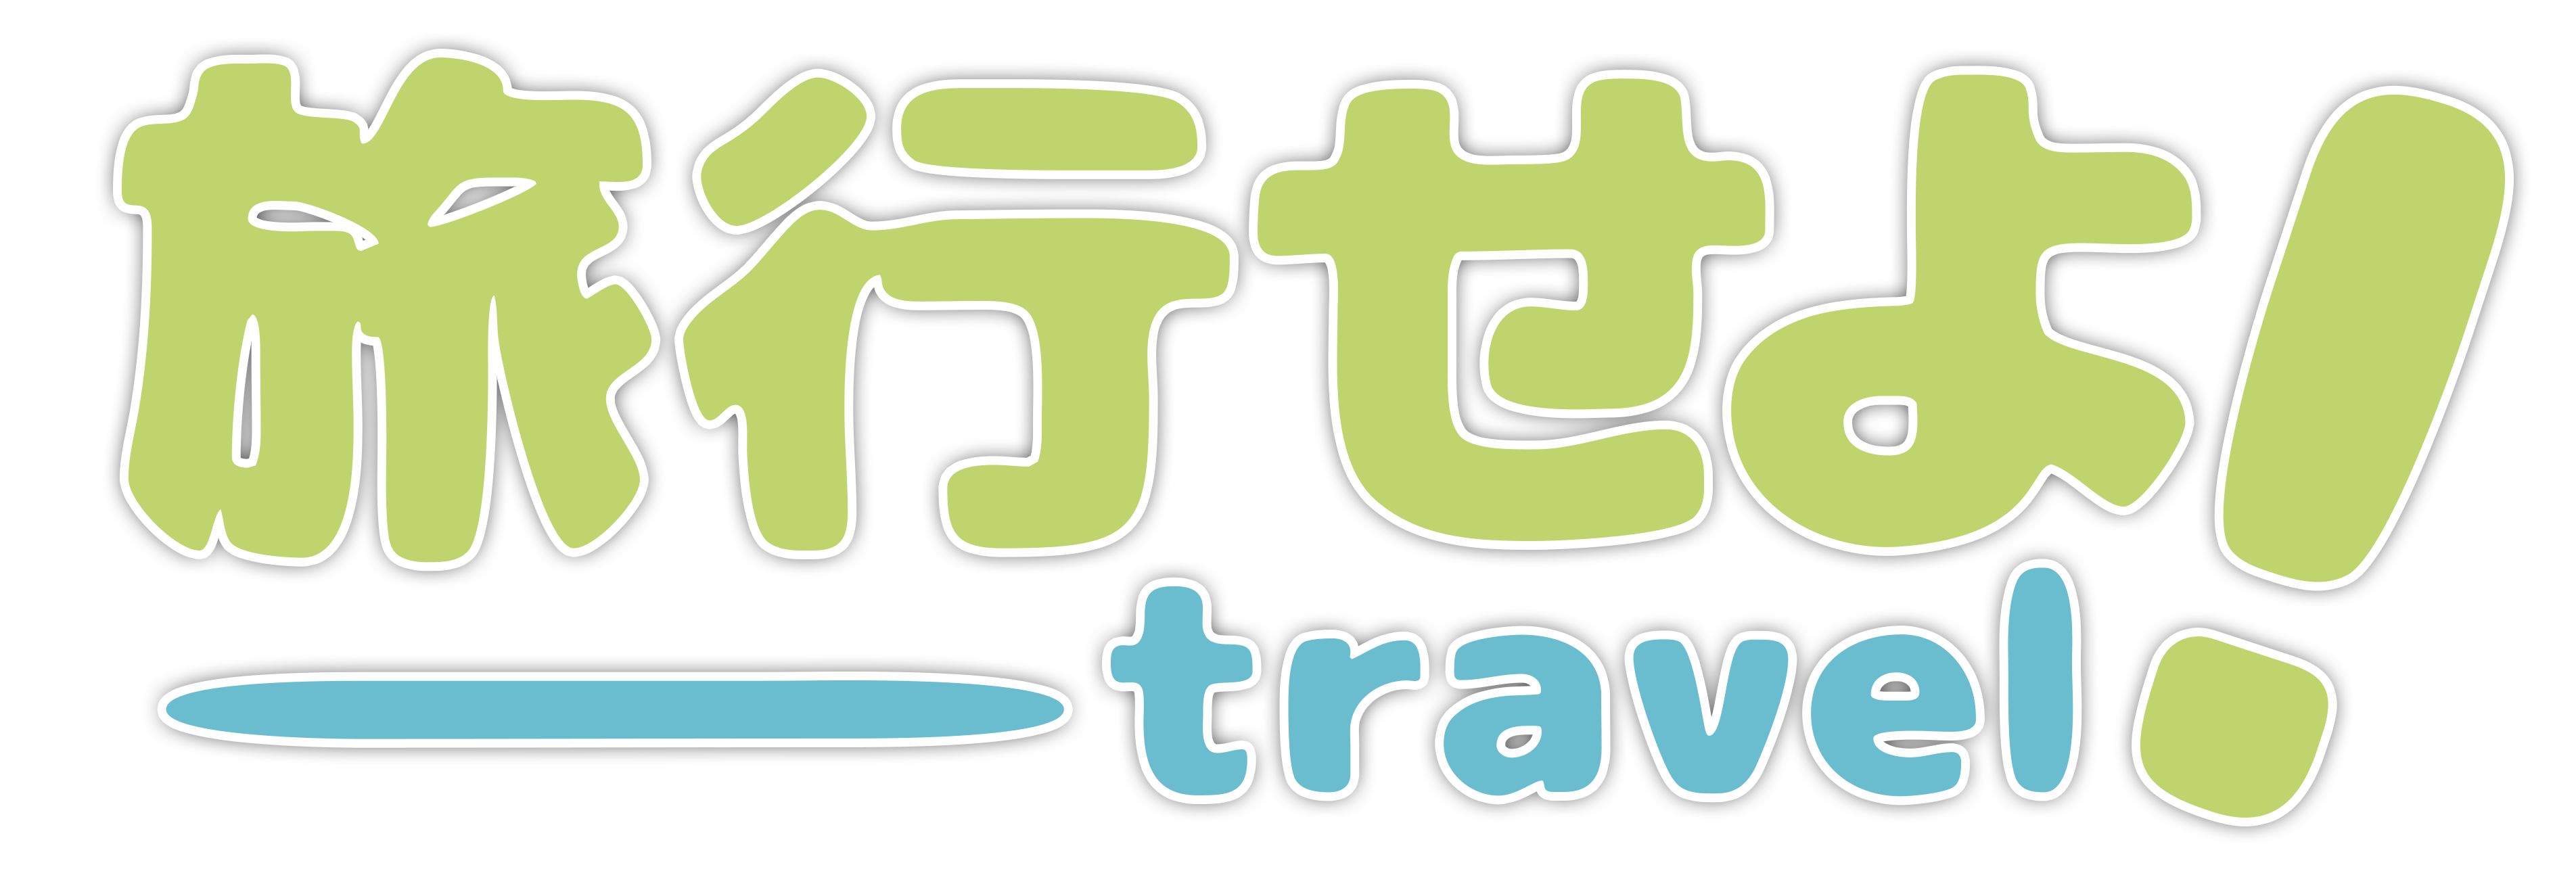 Japanese characters spell 旅行せよ！ with a translation below that says Travel!.